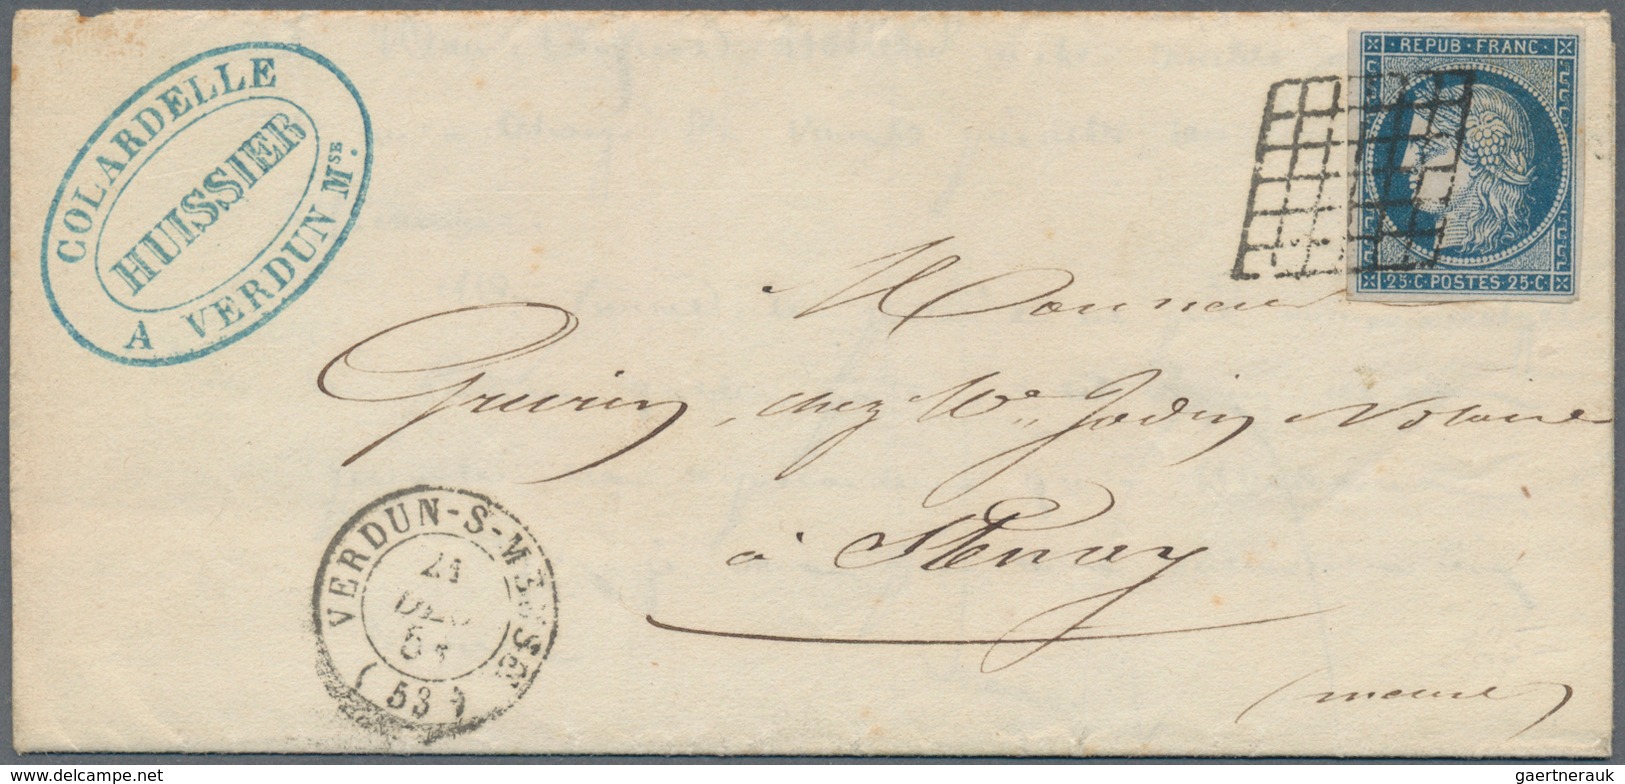 26371 Frankreich: 1849/1852, CERES, group of twelve entires bearing frankings 20c. black and 25c. blue, sh